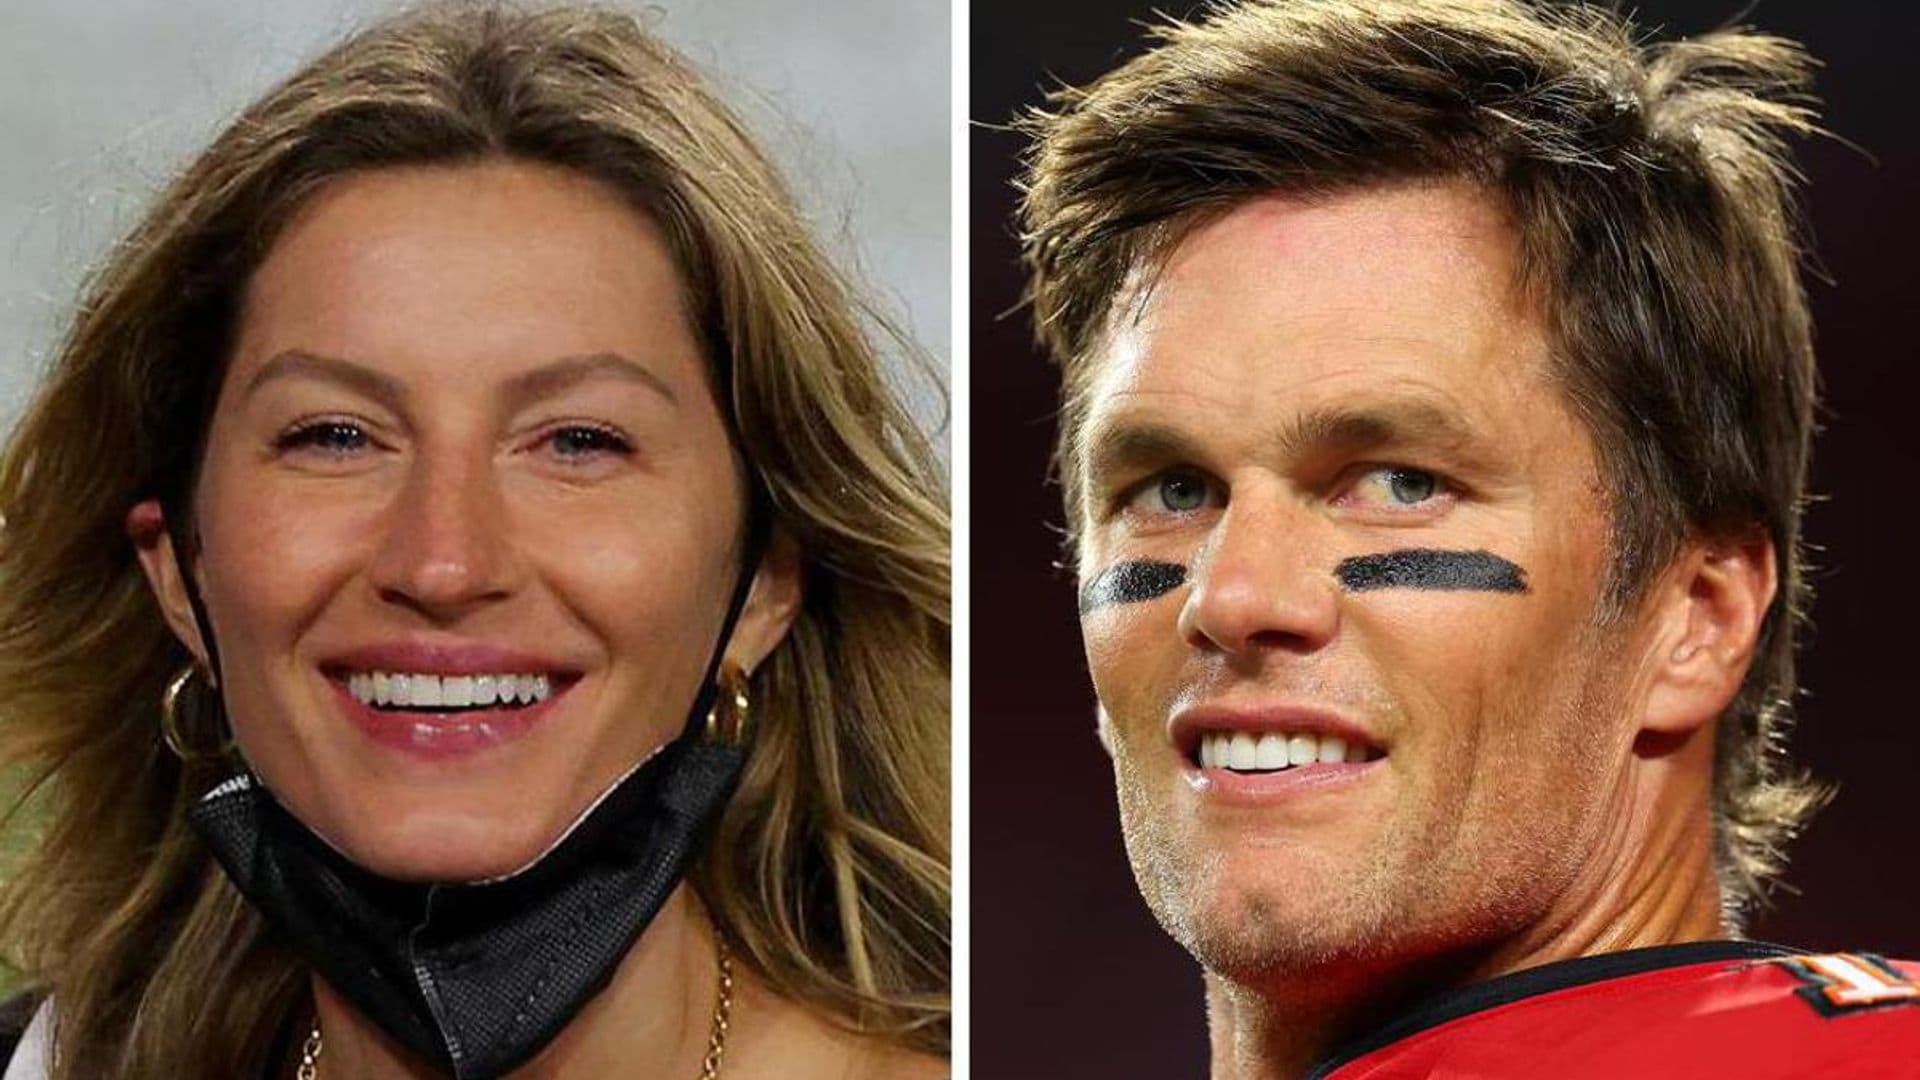 Tom Brady sheds light on how he is doing after his divorce from Gisele Bündchen